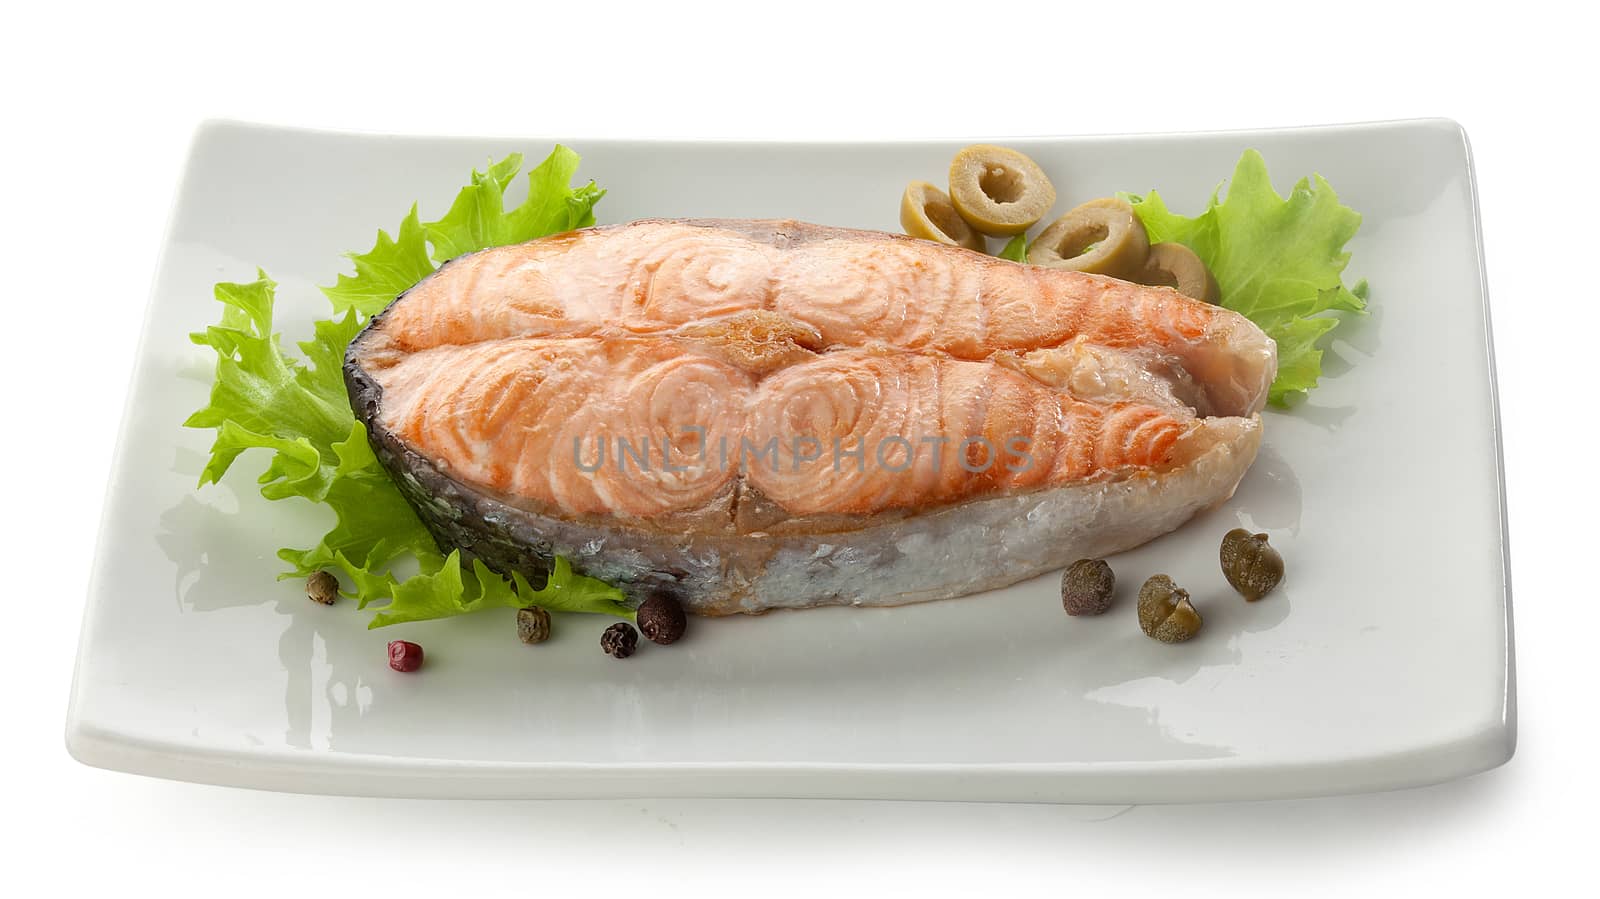 Baked steak of salmon with olives, capers, lettuce and black peppers